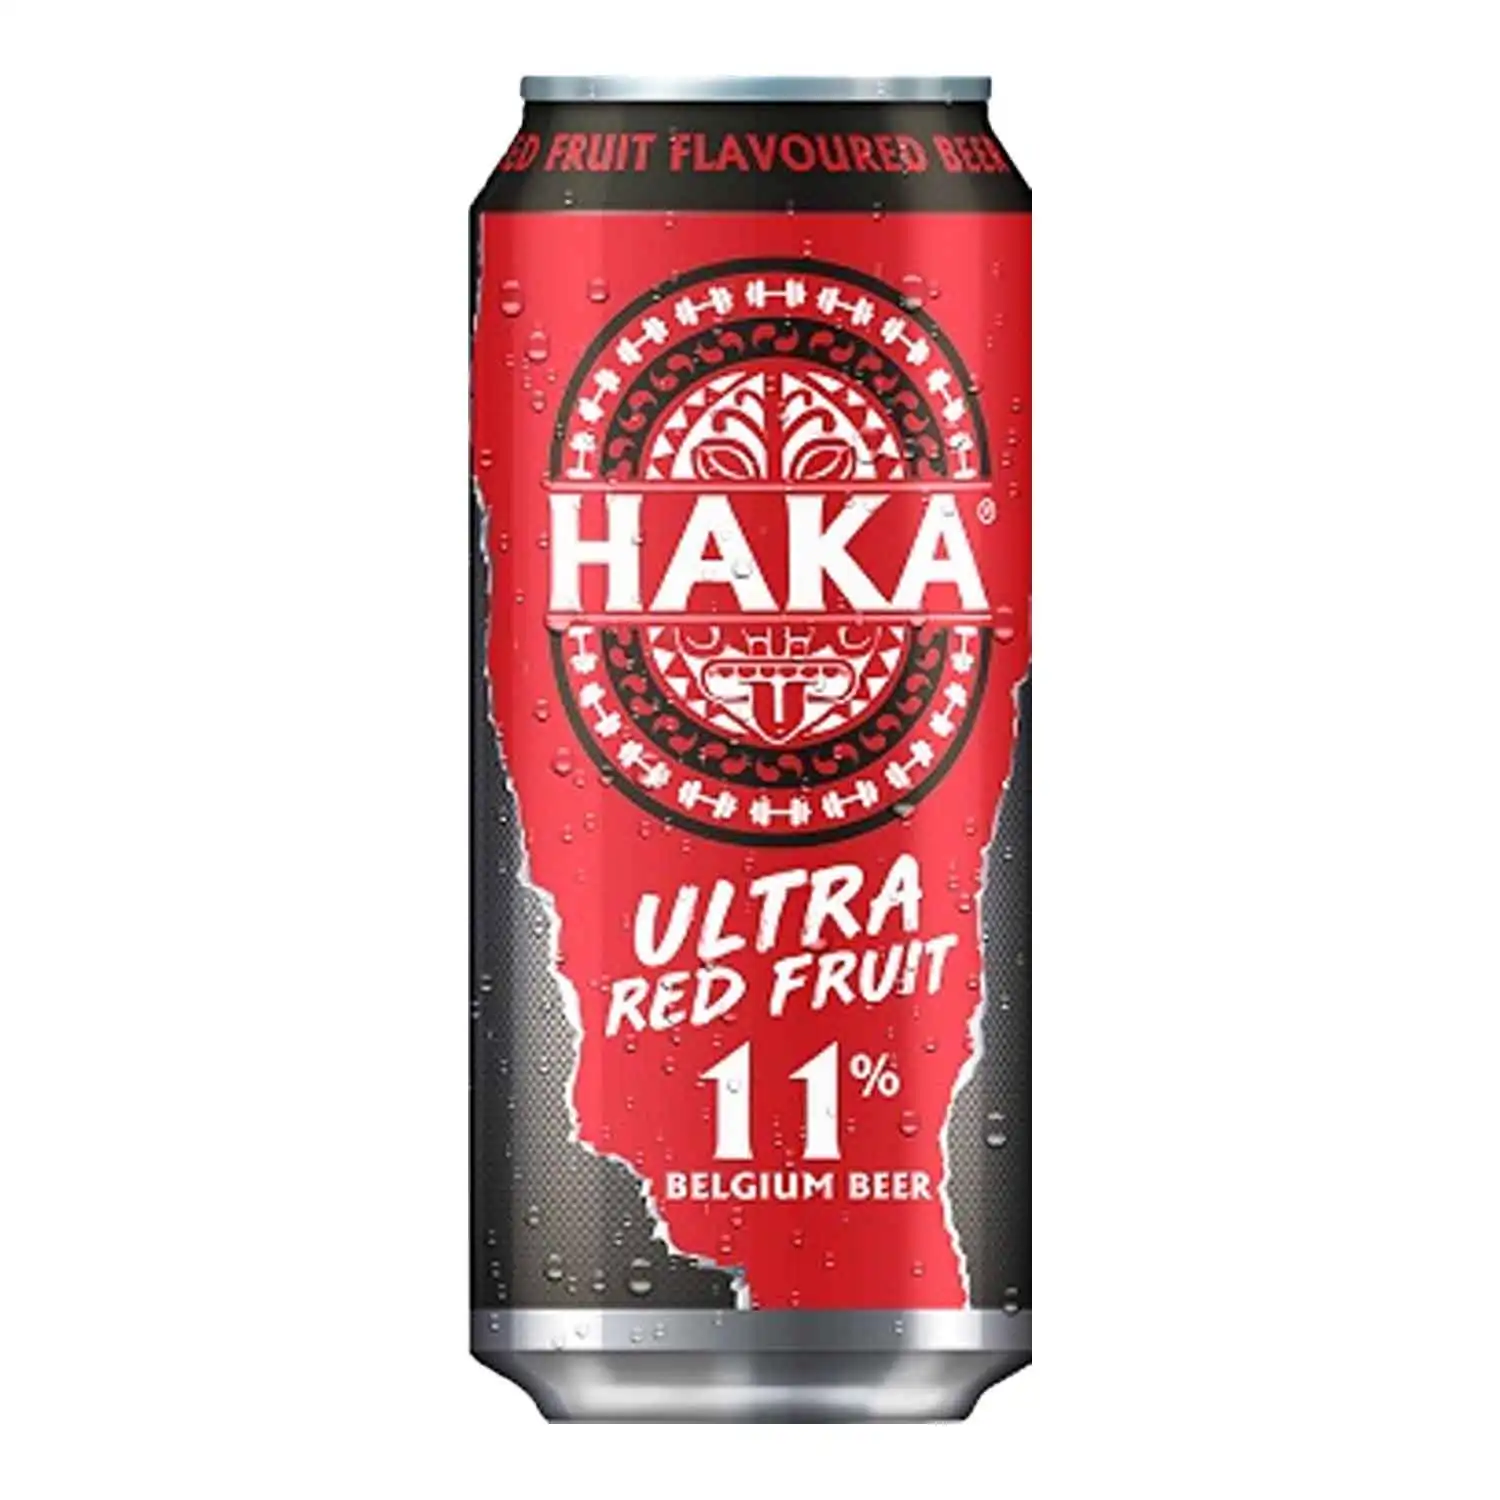 Haka ultra red fruit 50cl Alc 11% - Buy at Real Tobacco